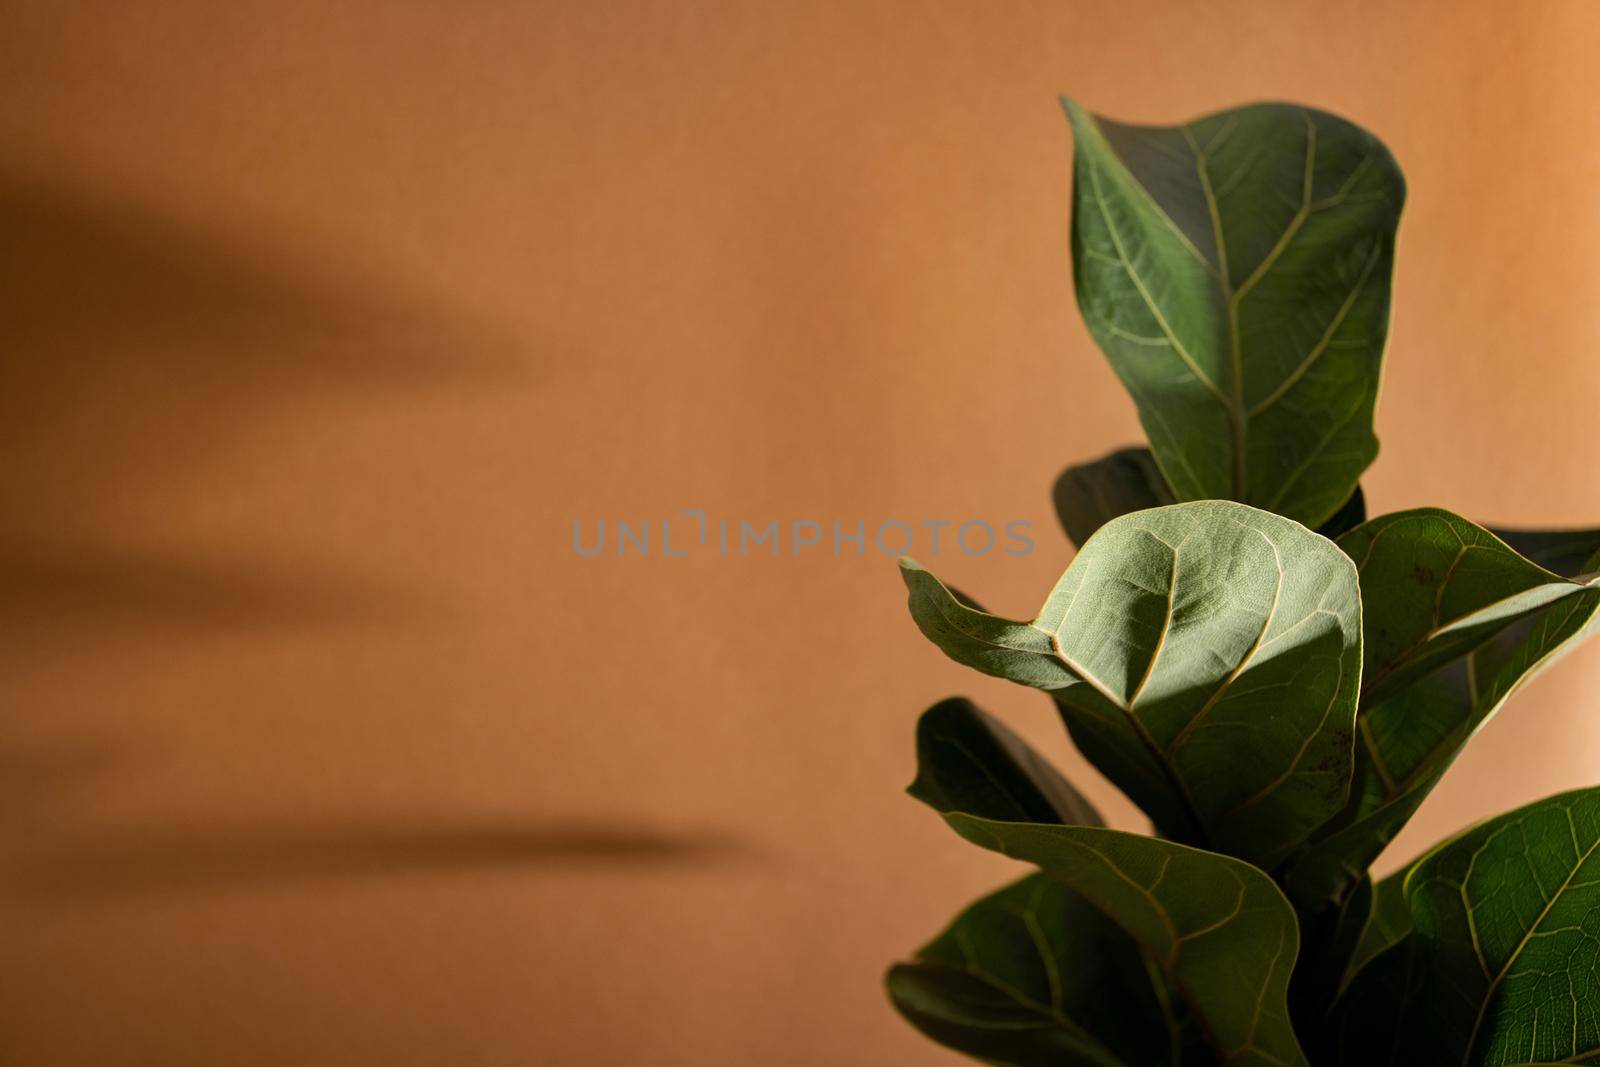 Green leaves of Fiddle Fig or Ficus Lyrata. Fiddle-leaf fig tree the popular ornamental tropical houseplant on brown background,, Air purifying plants for home, Houseplants With Health Benefits by katrinaera